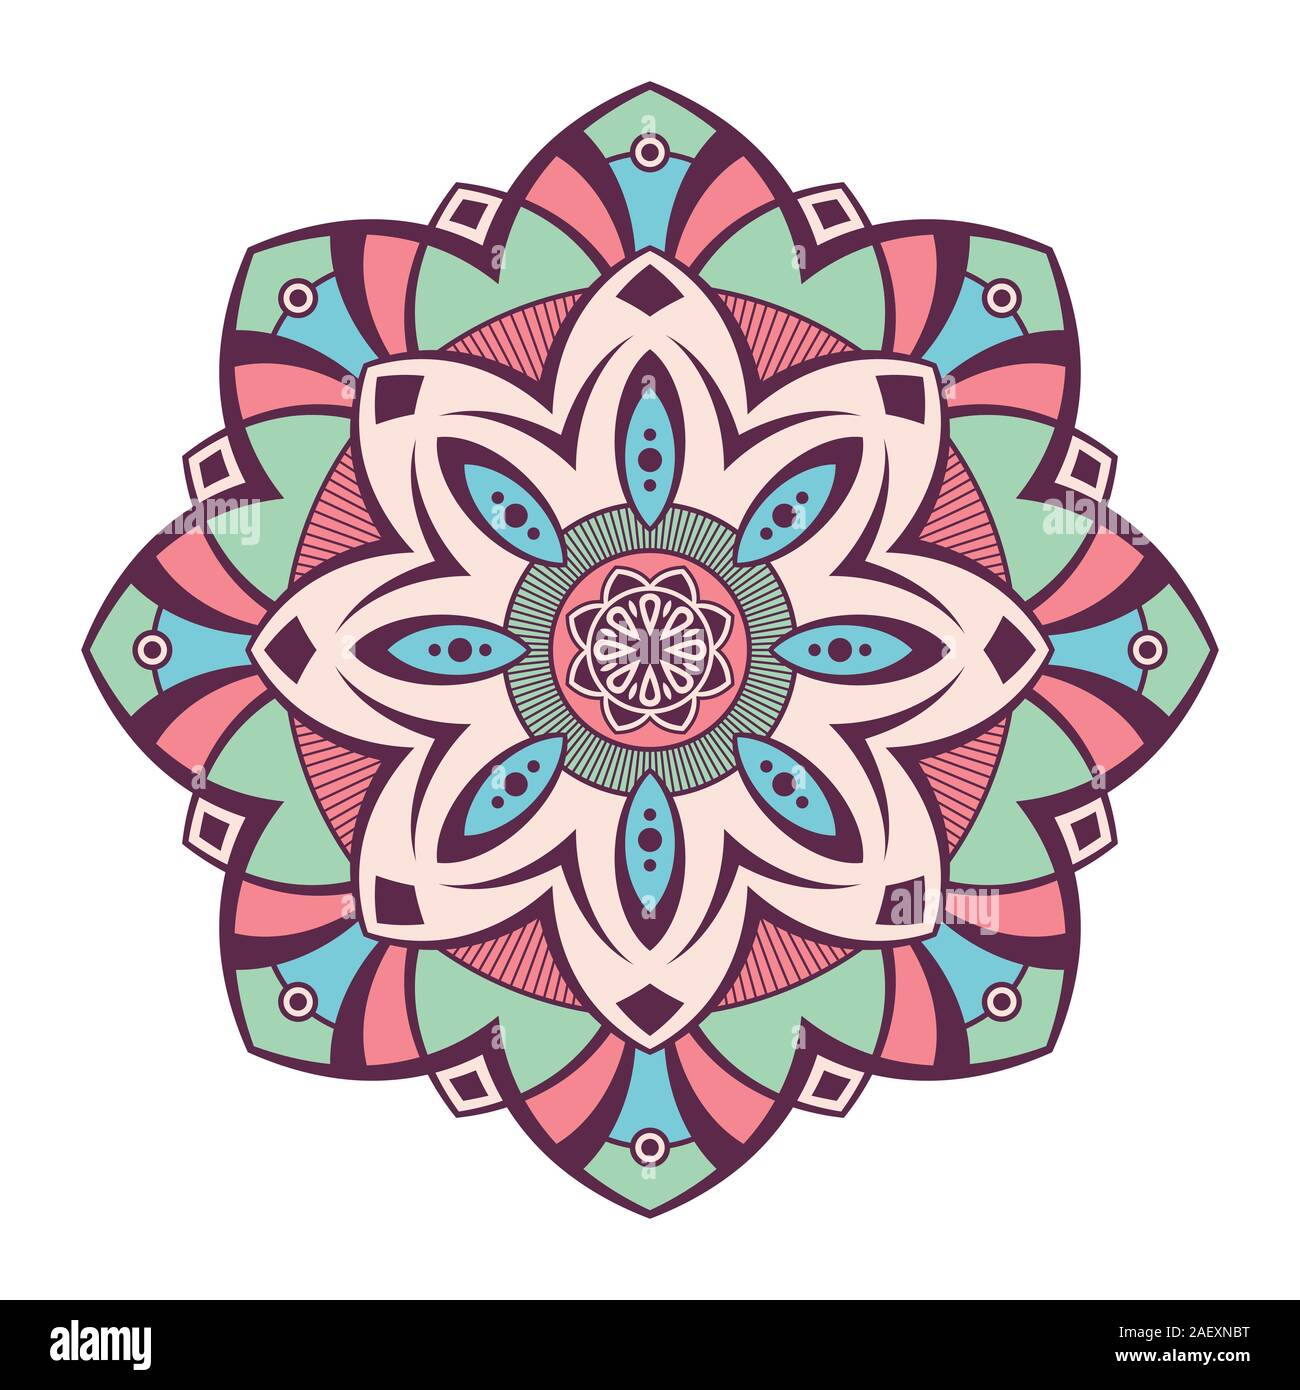 Mandala. Decorative round ornament. Isolated on white background. Arabic, Indian, ottoman motifs. Picture for coloring. For cards, invitations. Stock Vector